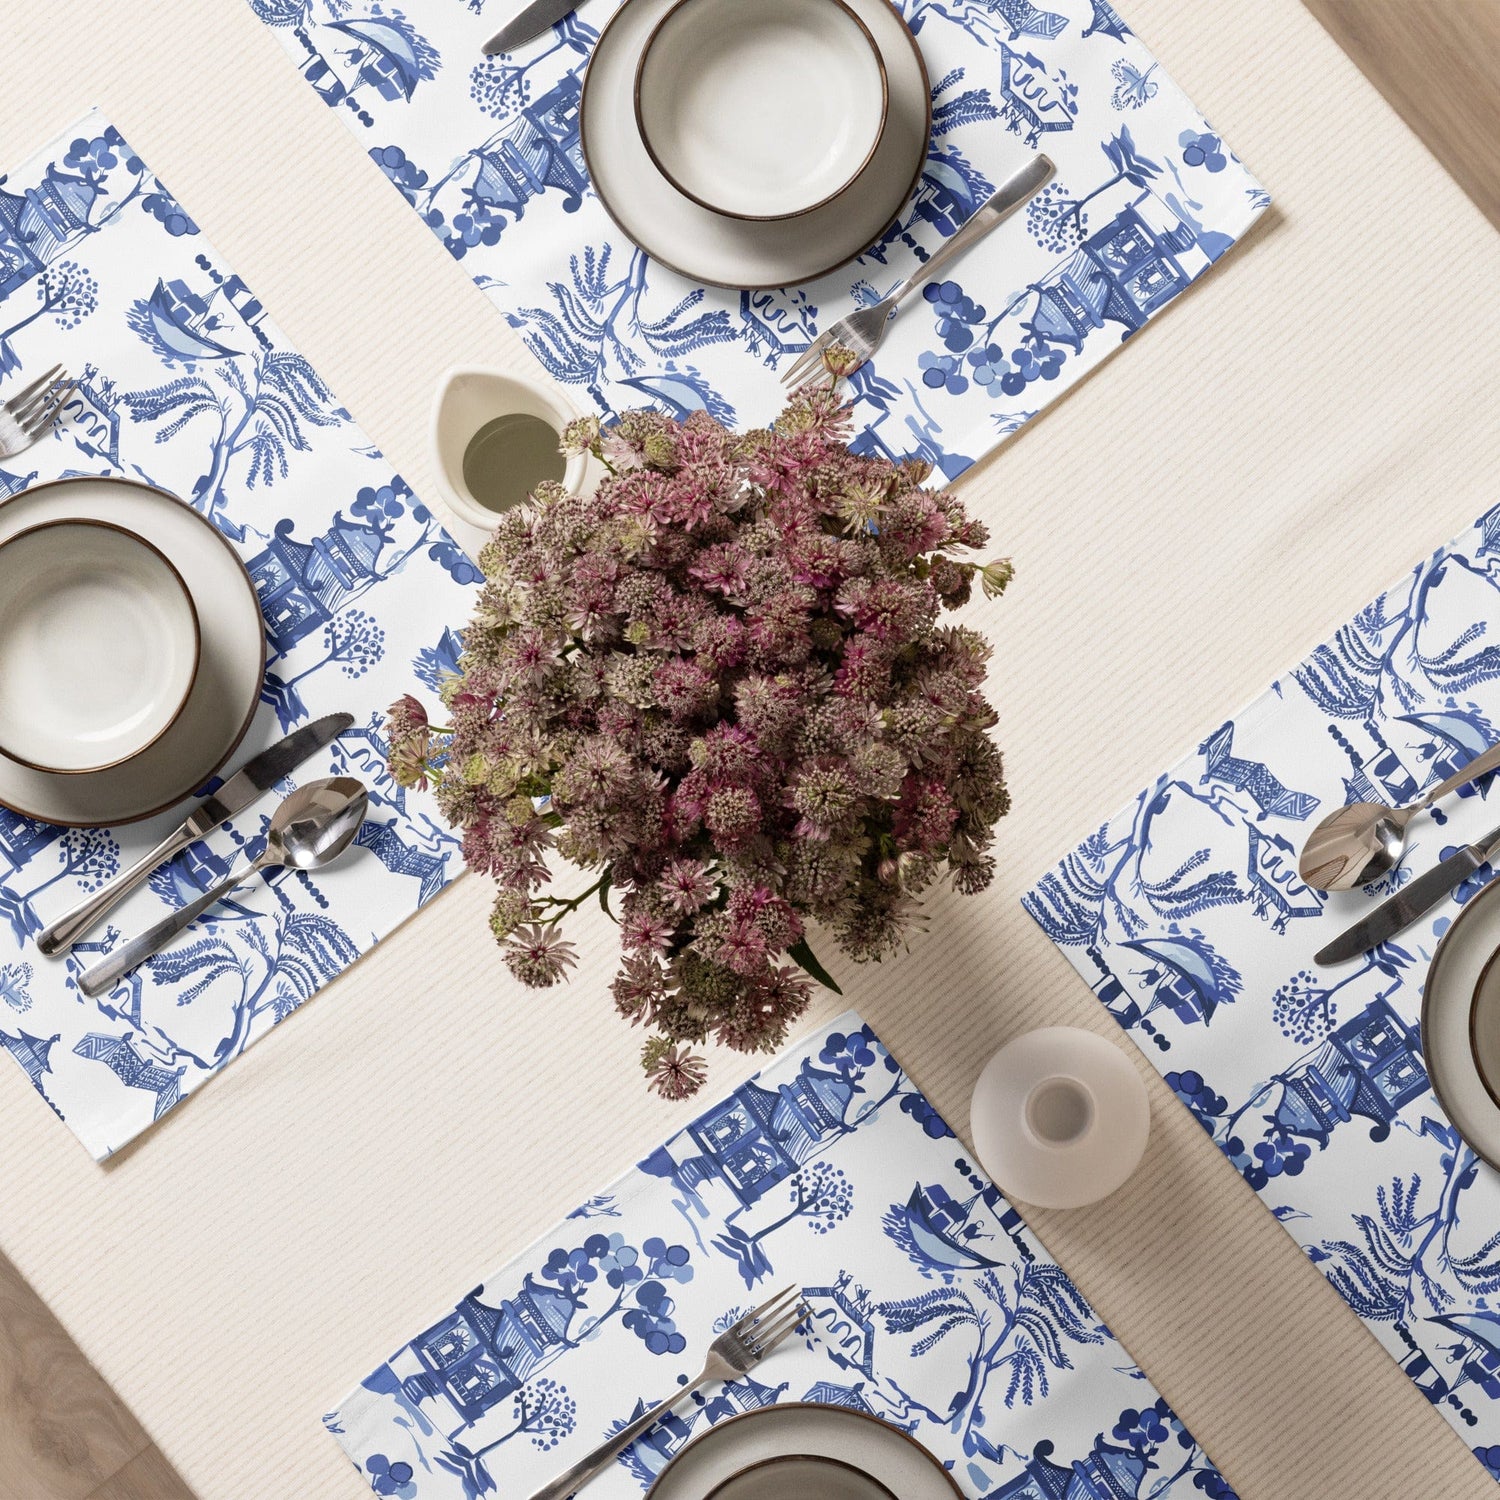 Kate McEnroe New York Blue Willow Chinoiserie Placemats, Set of 4, Classic Blue and White Table Mats, Oriental Dining Decor Placemats 9106838_17484